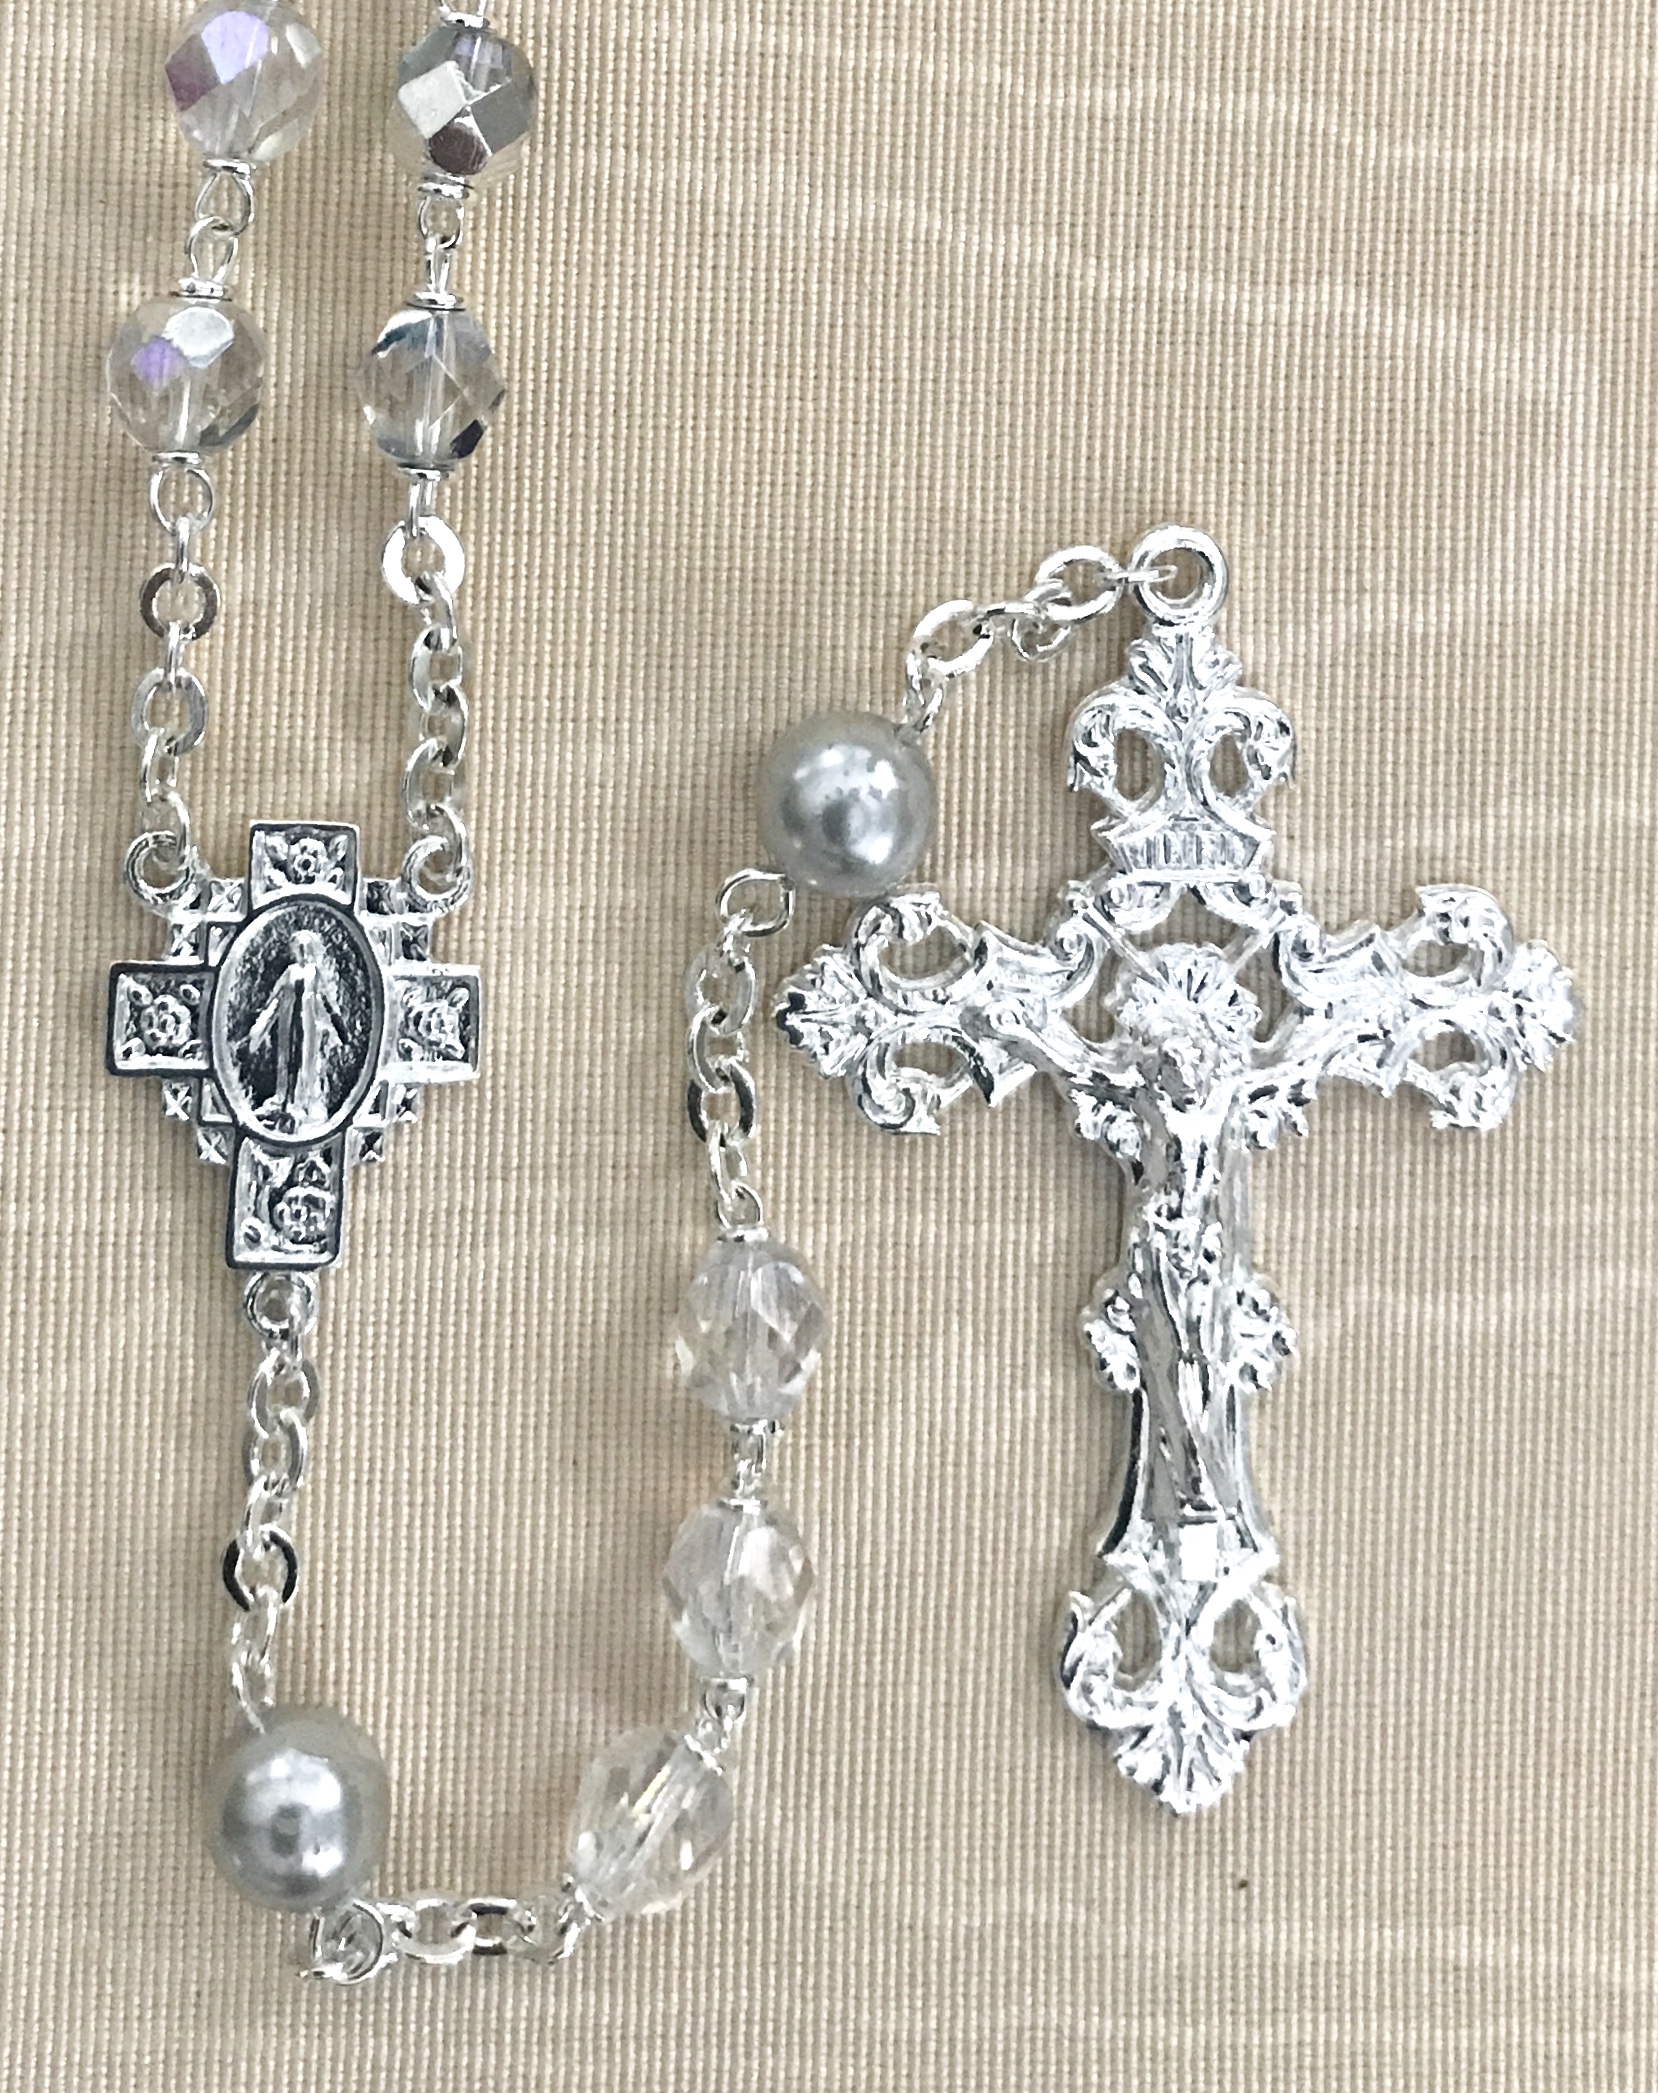 7mm CRYSTAL AB WITH LIGHT SAPPHIRE PEARL OUR FATHER BEADS STERLING SILVER PLATED ROSARY GIFT BOXED